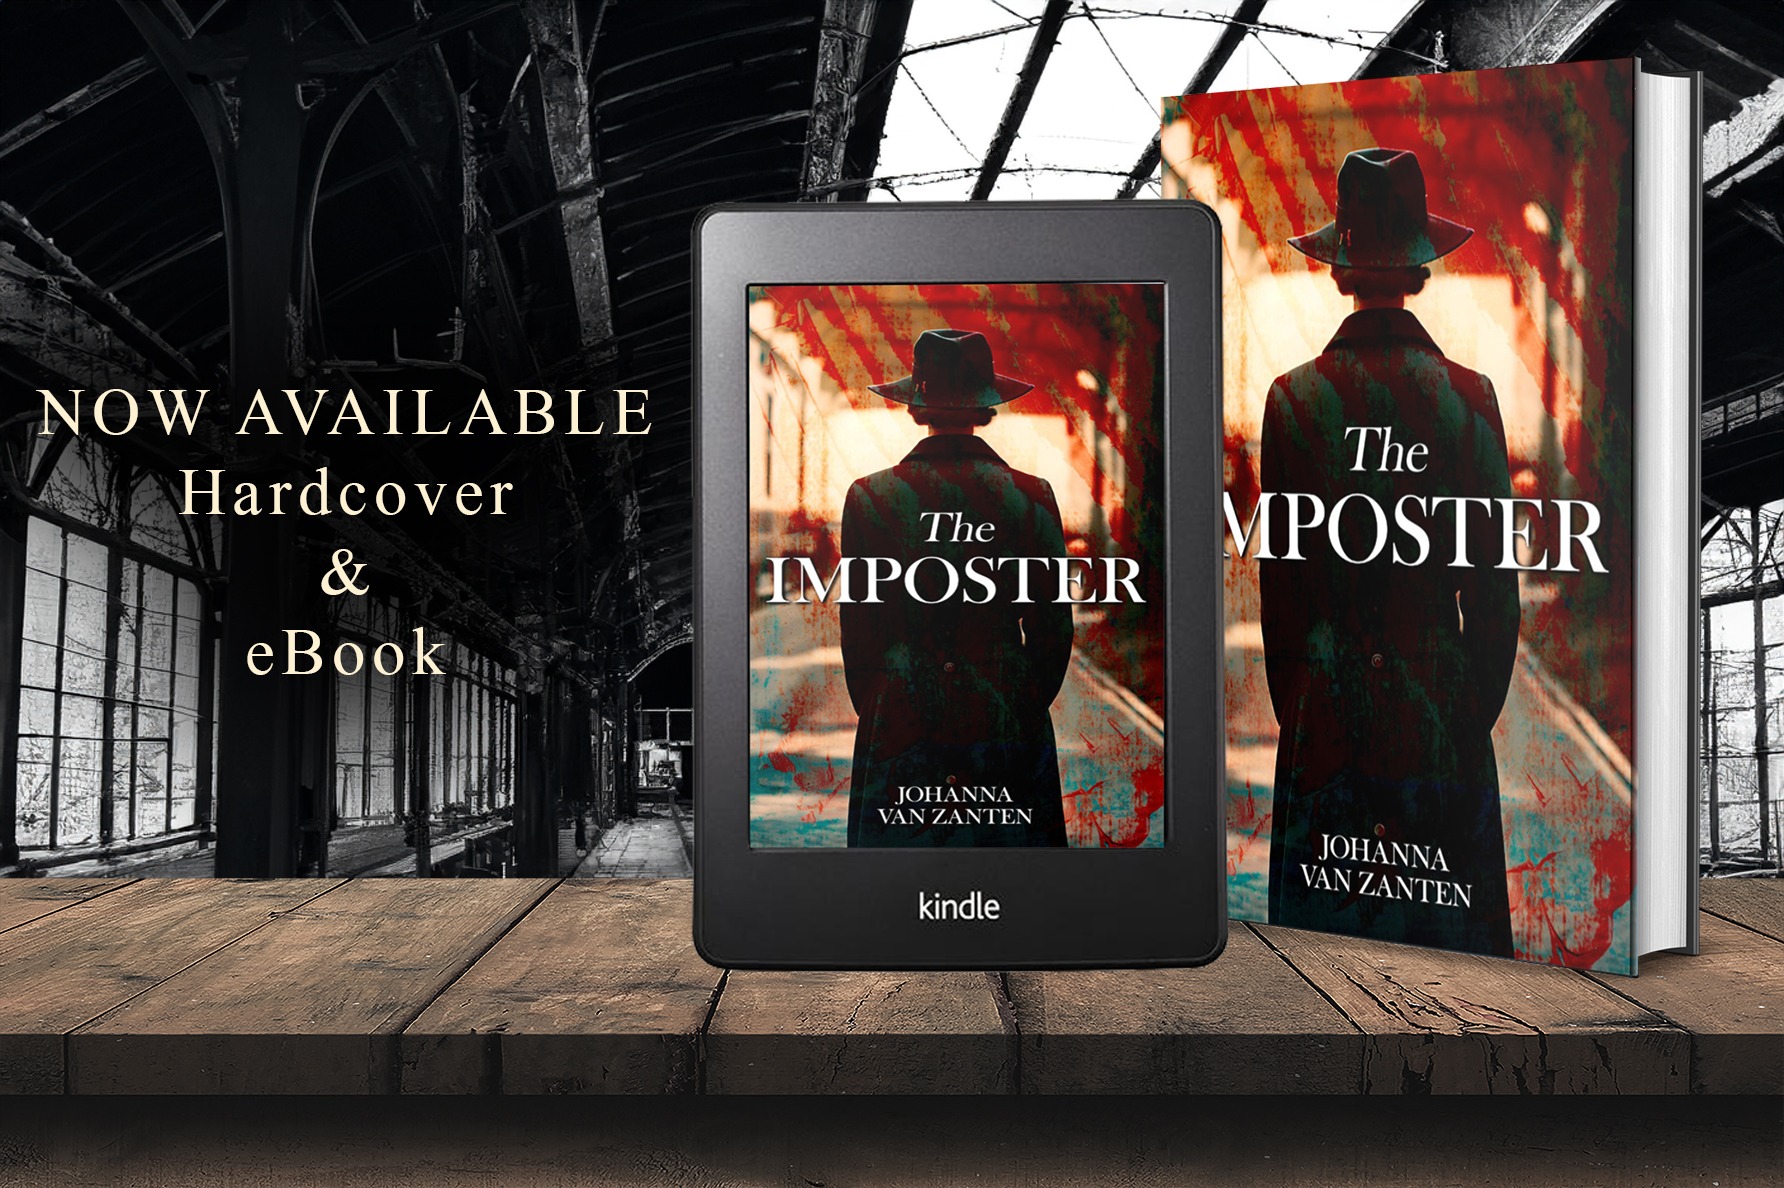 The Imposter by Johanna Van Zanten, now available from Histria Books